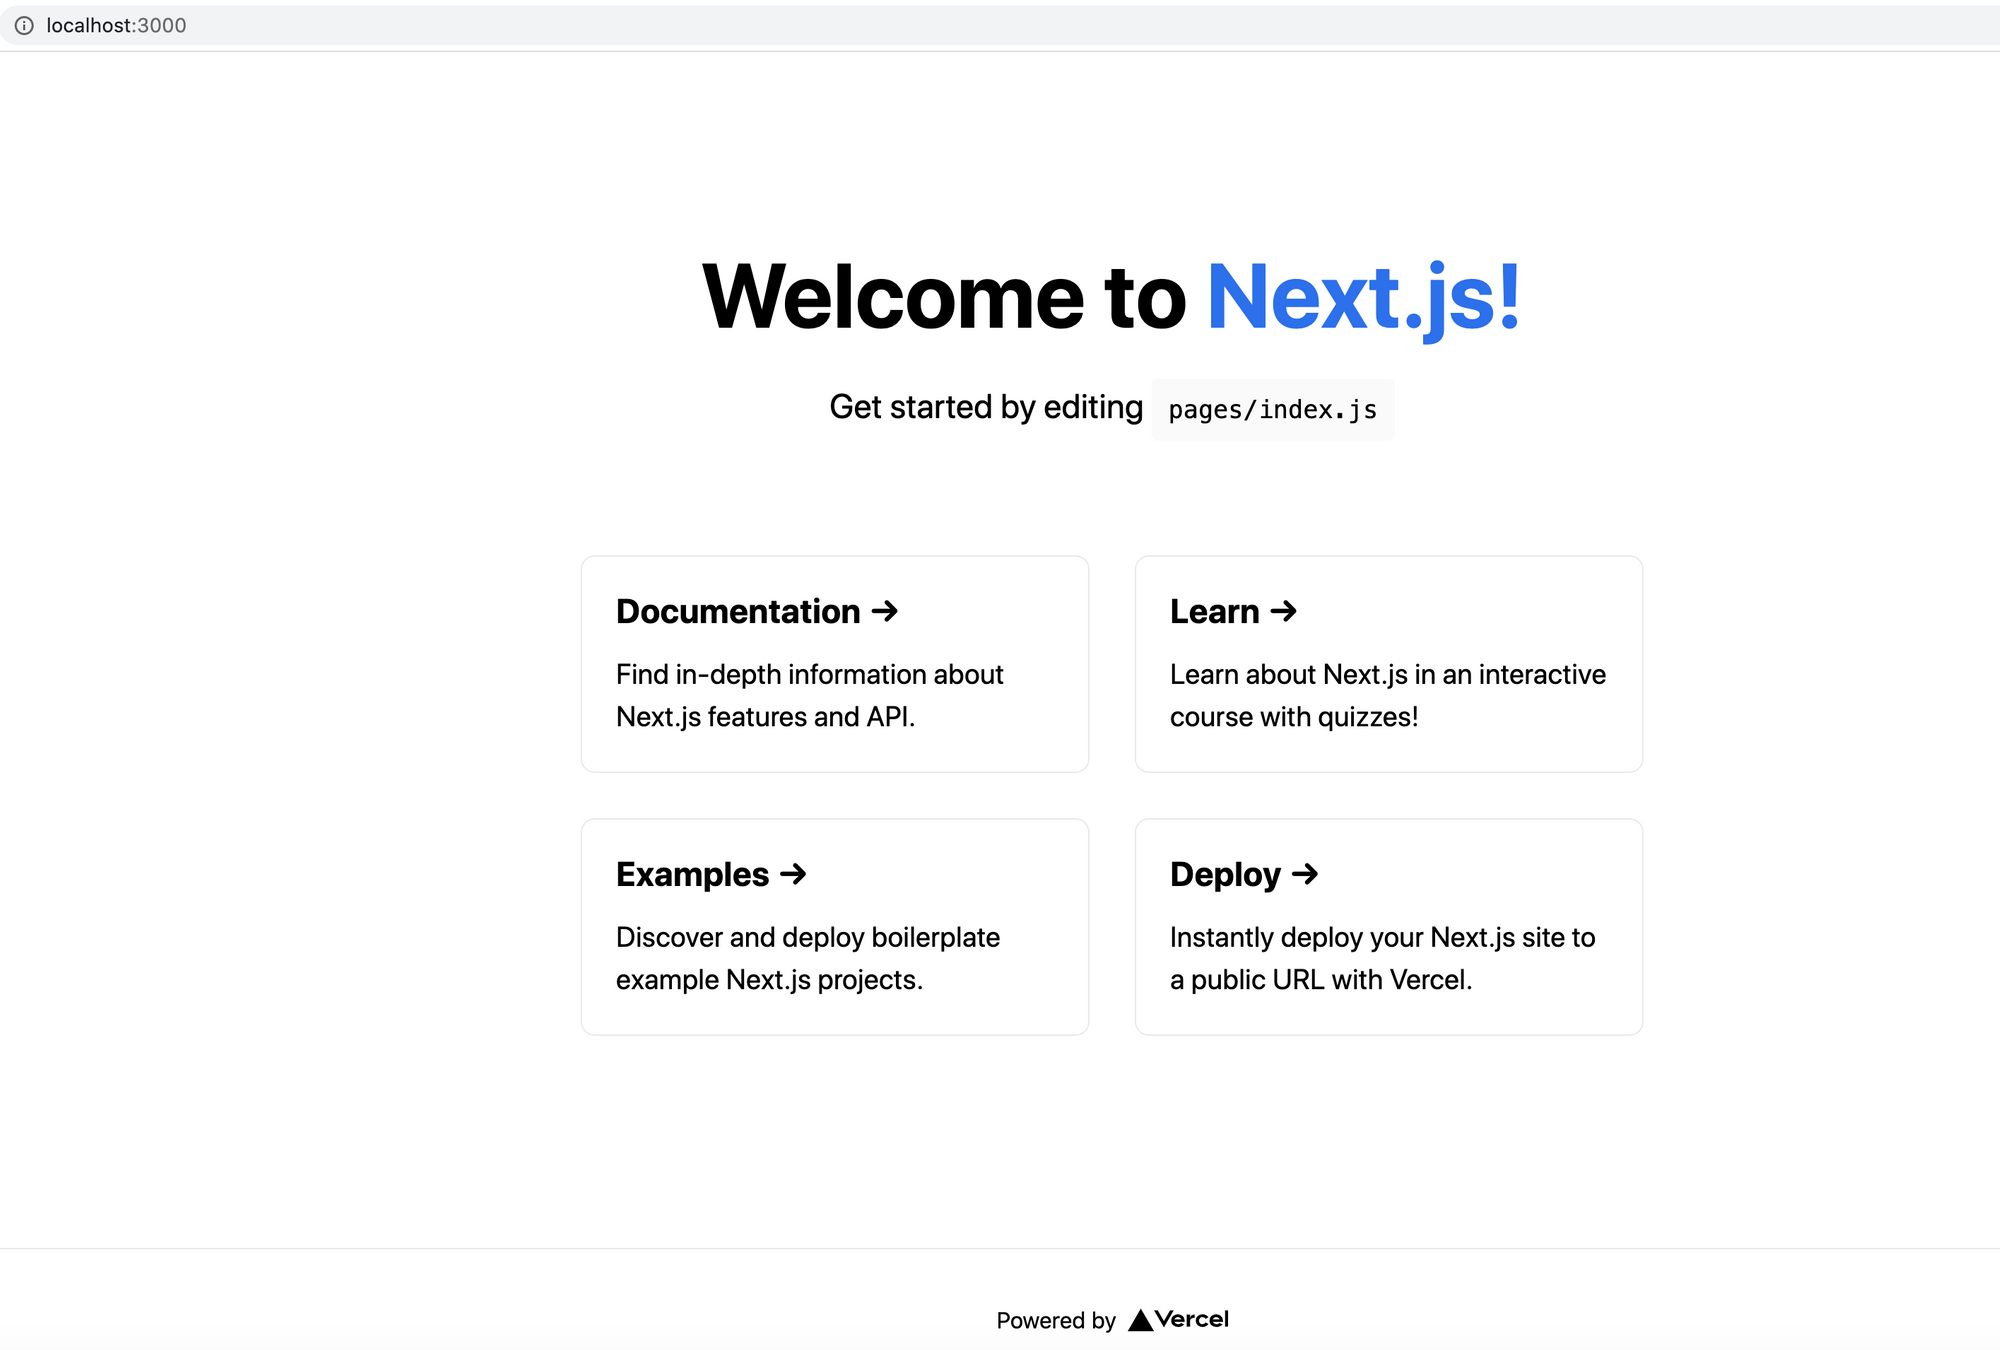 Building forms with Next.js and Getform